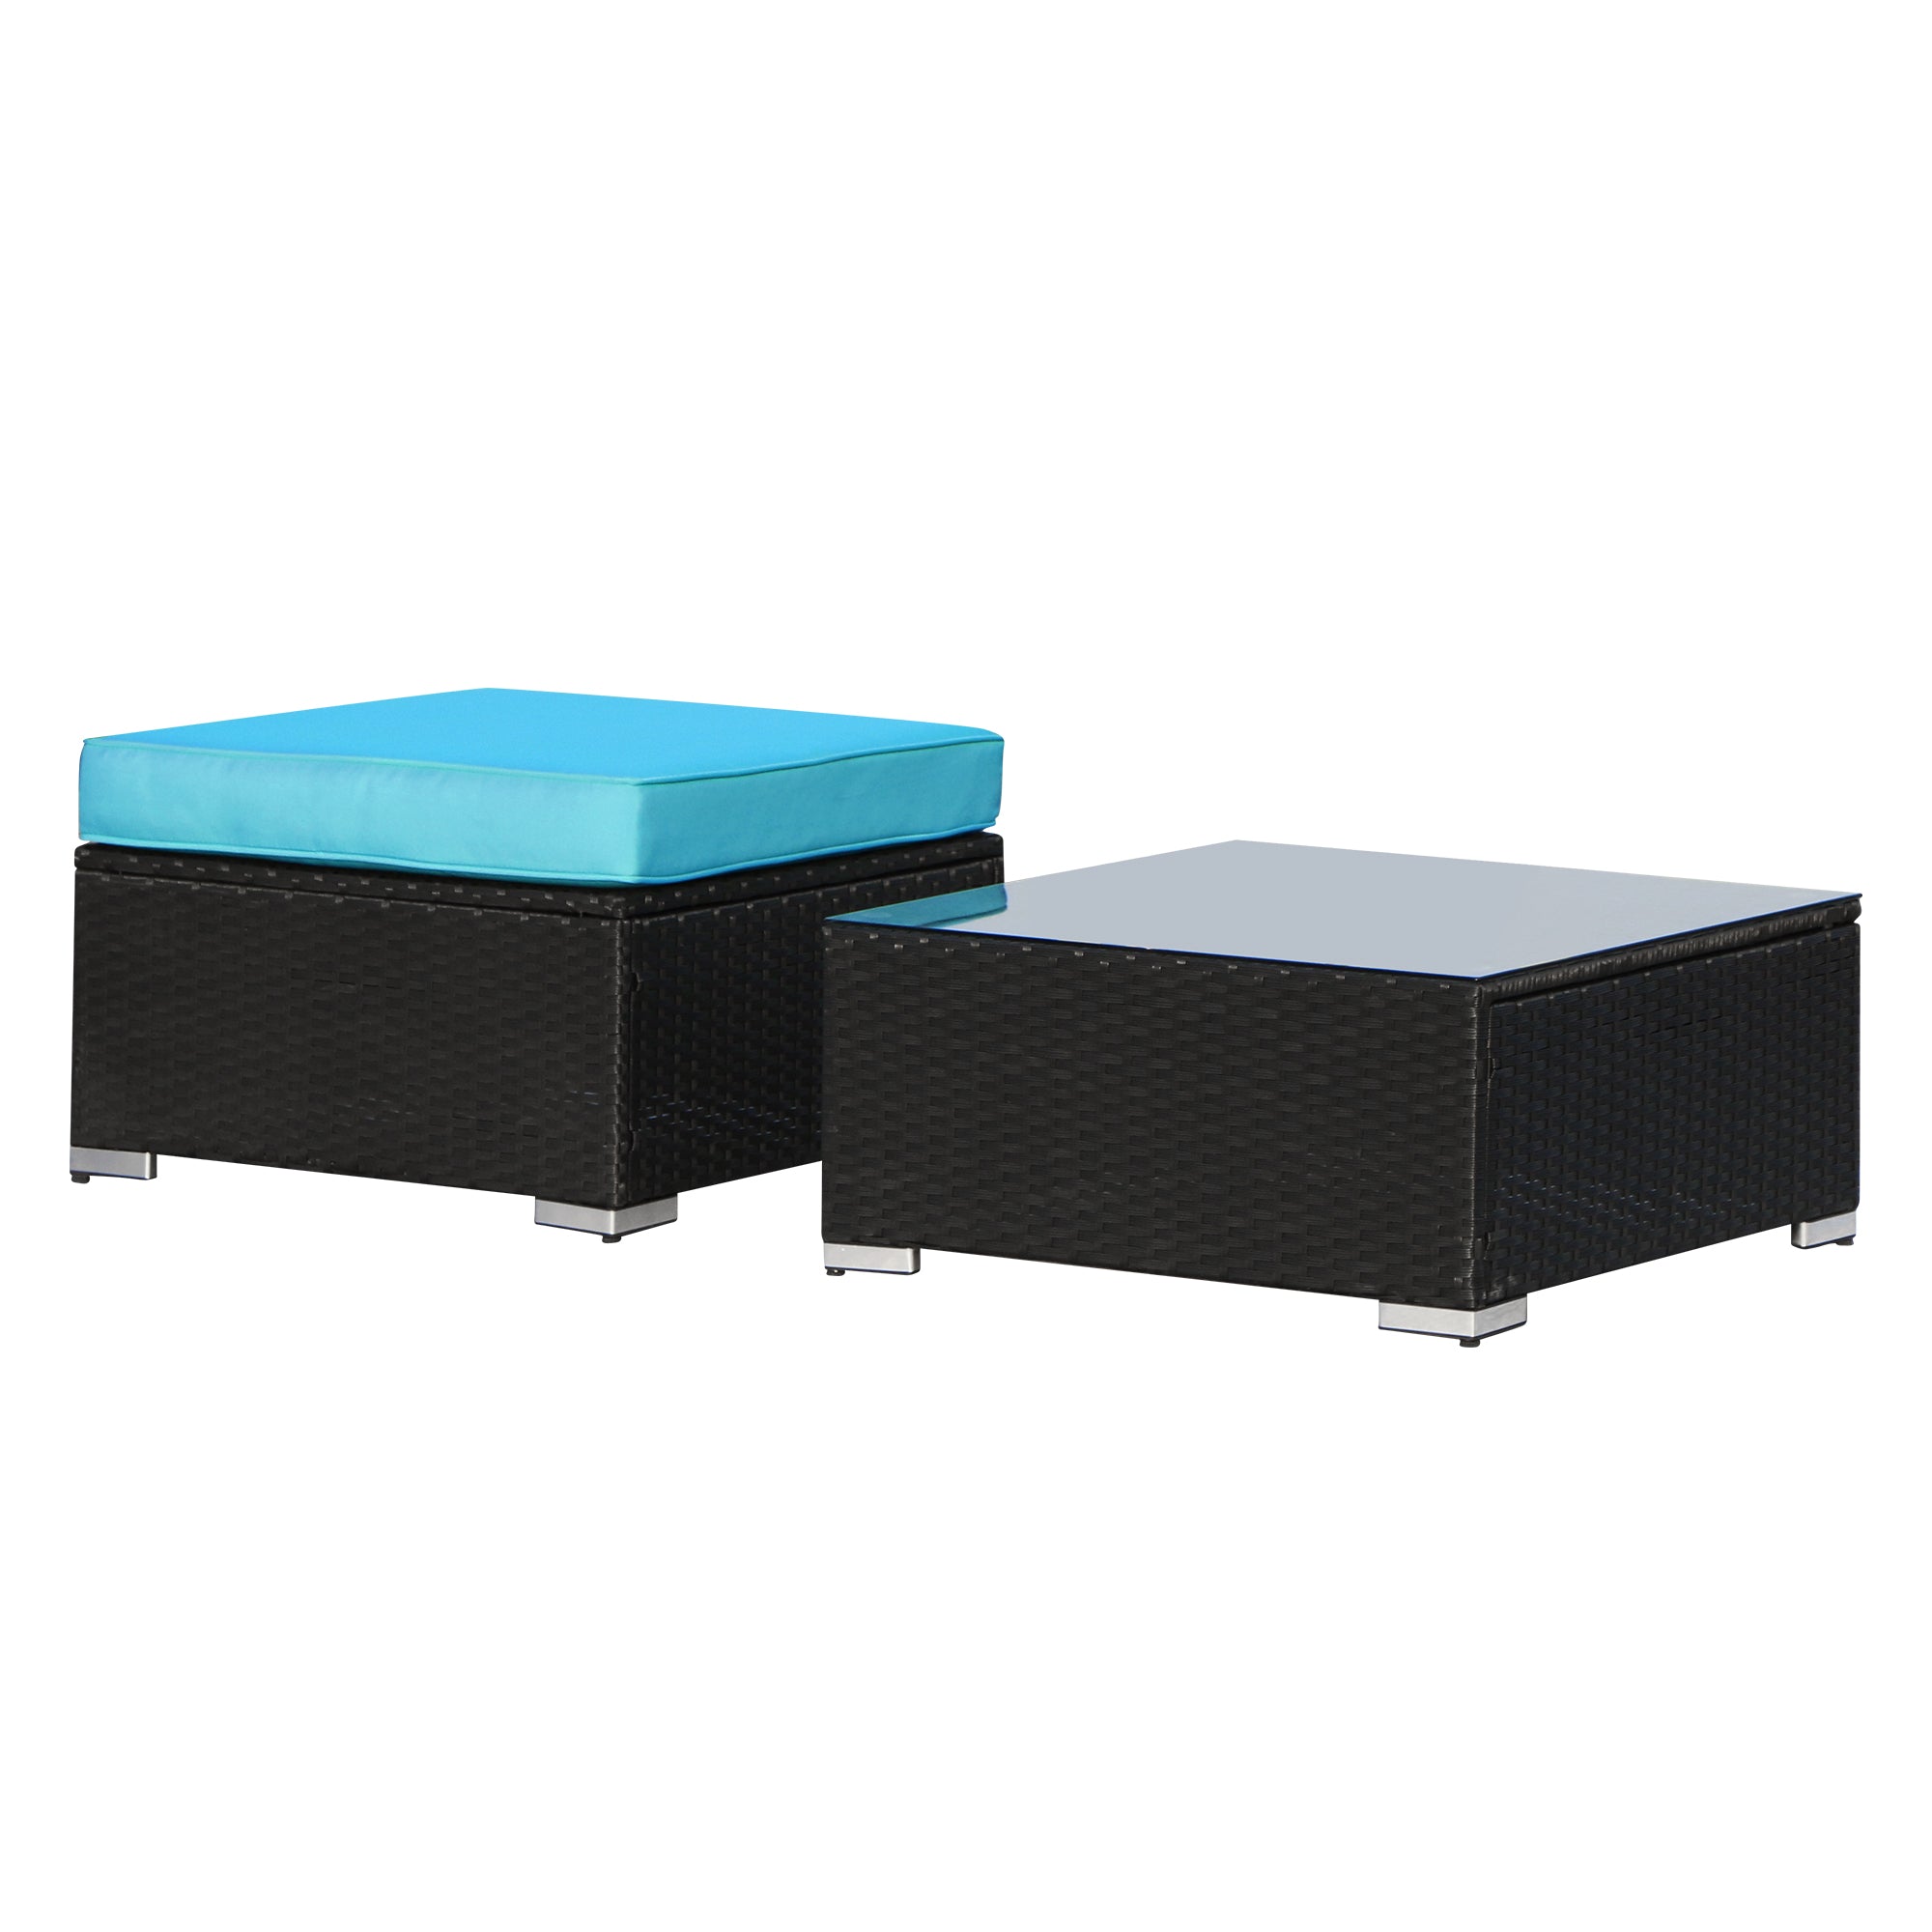 2 Pieces Sectional Ottoman with Coffee Table, Turquoise Cushions